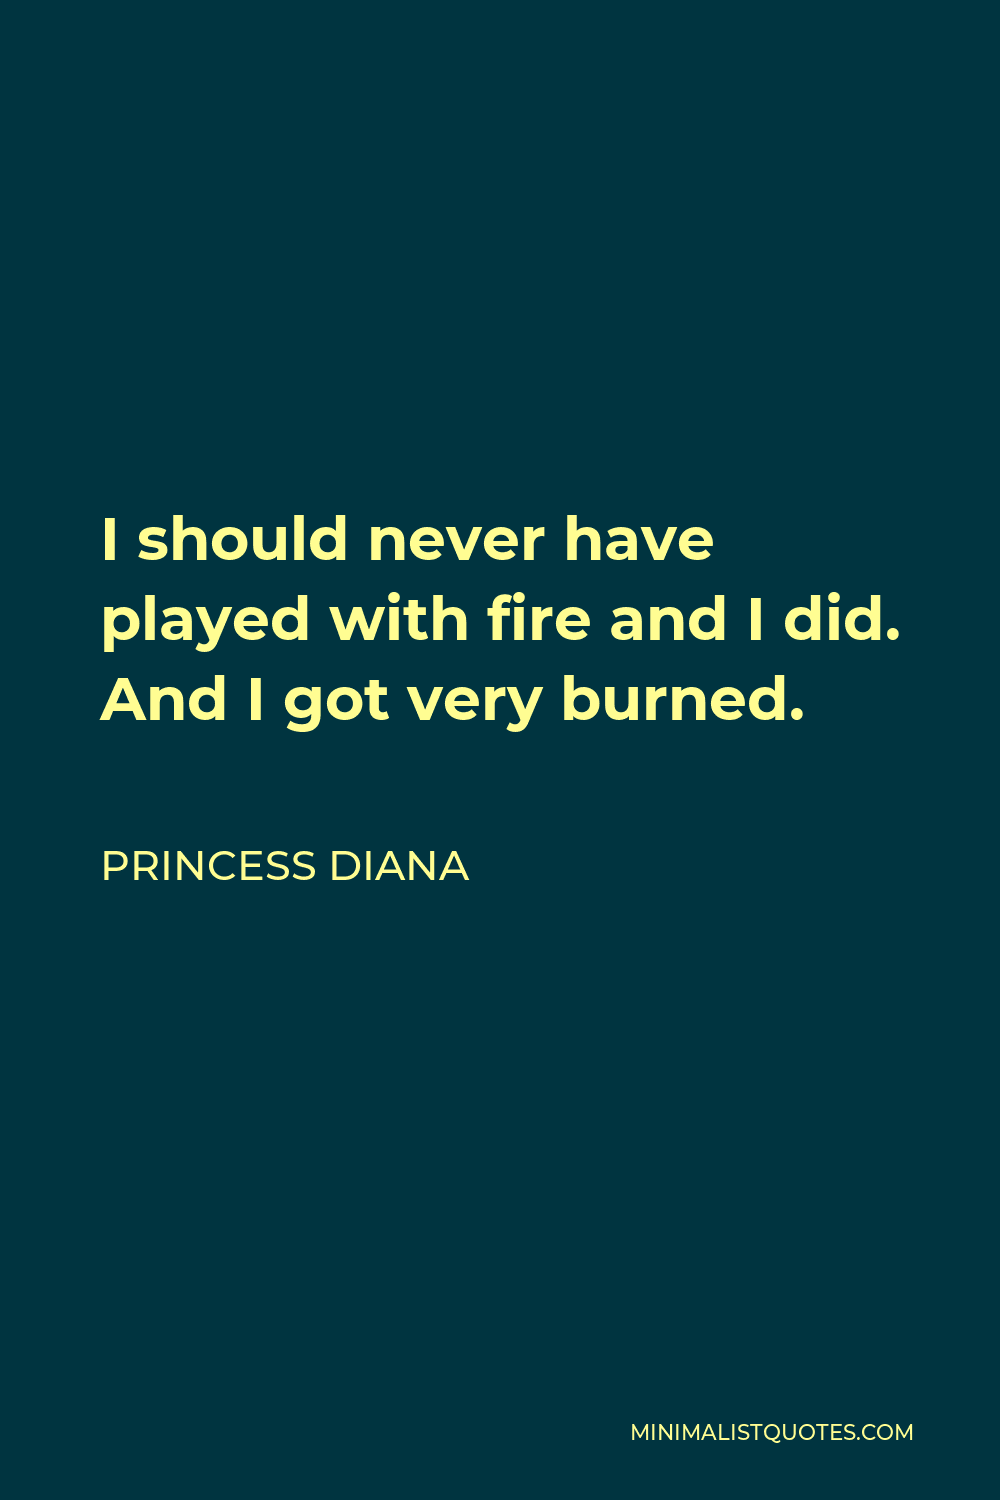 Princess Diana Quote - I should never have played with fire and I did. And I got very burned.